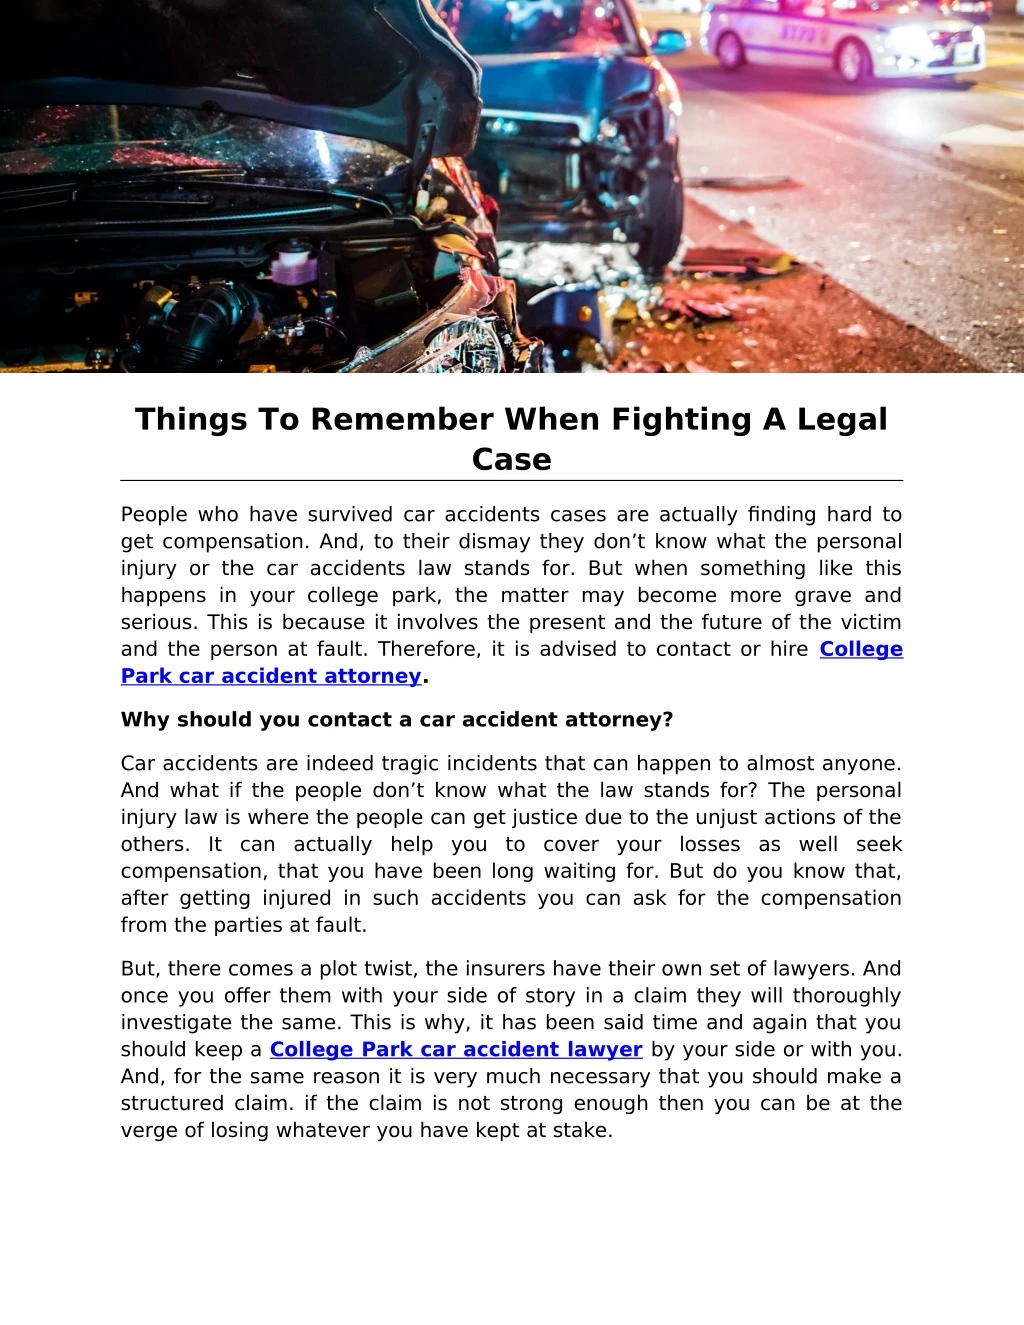 things to remember when fighting a legal case